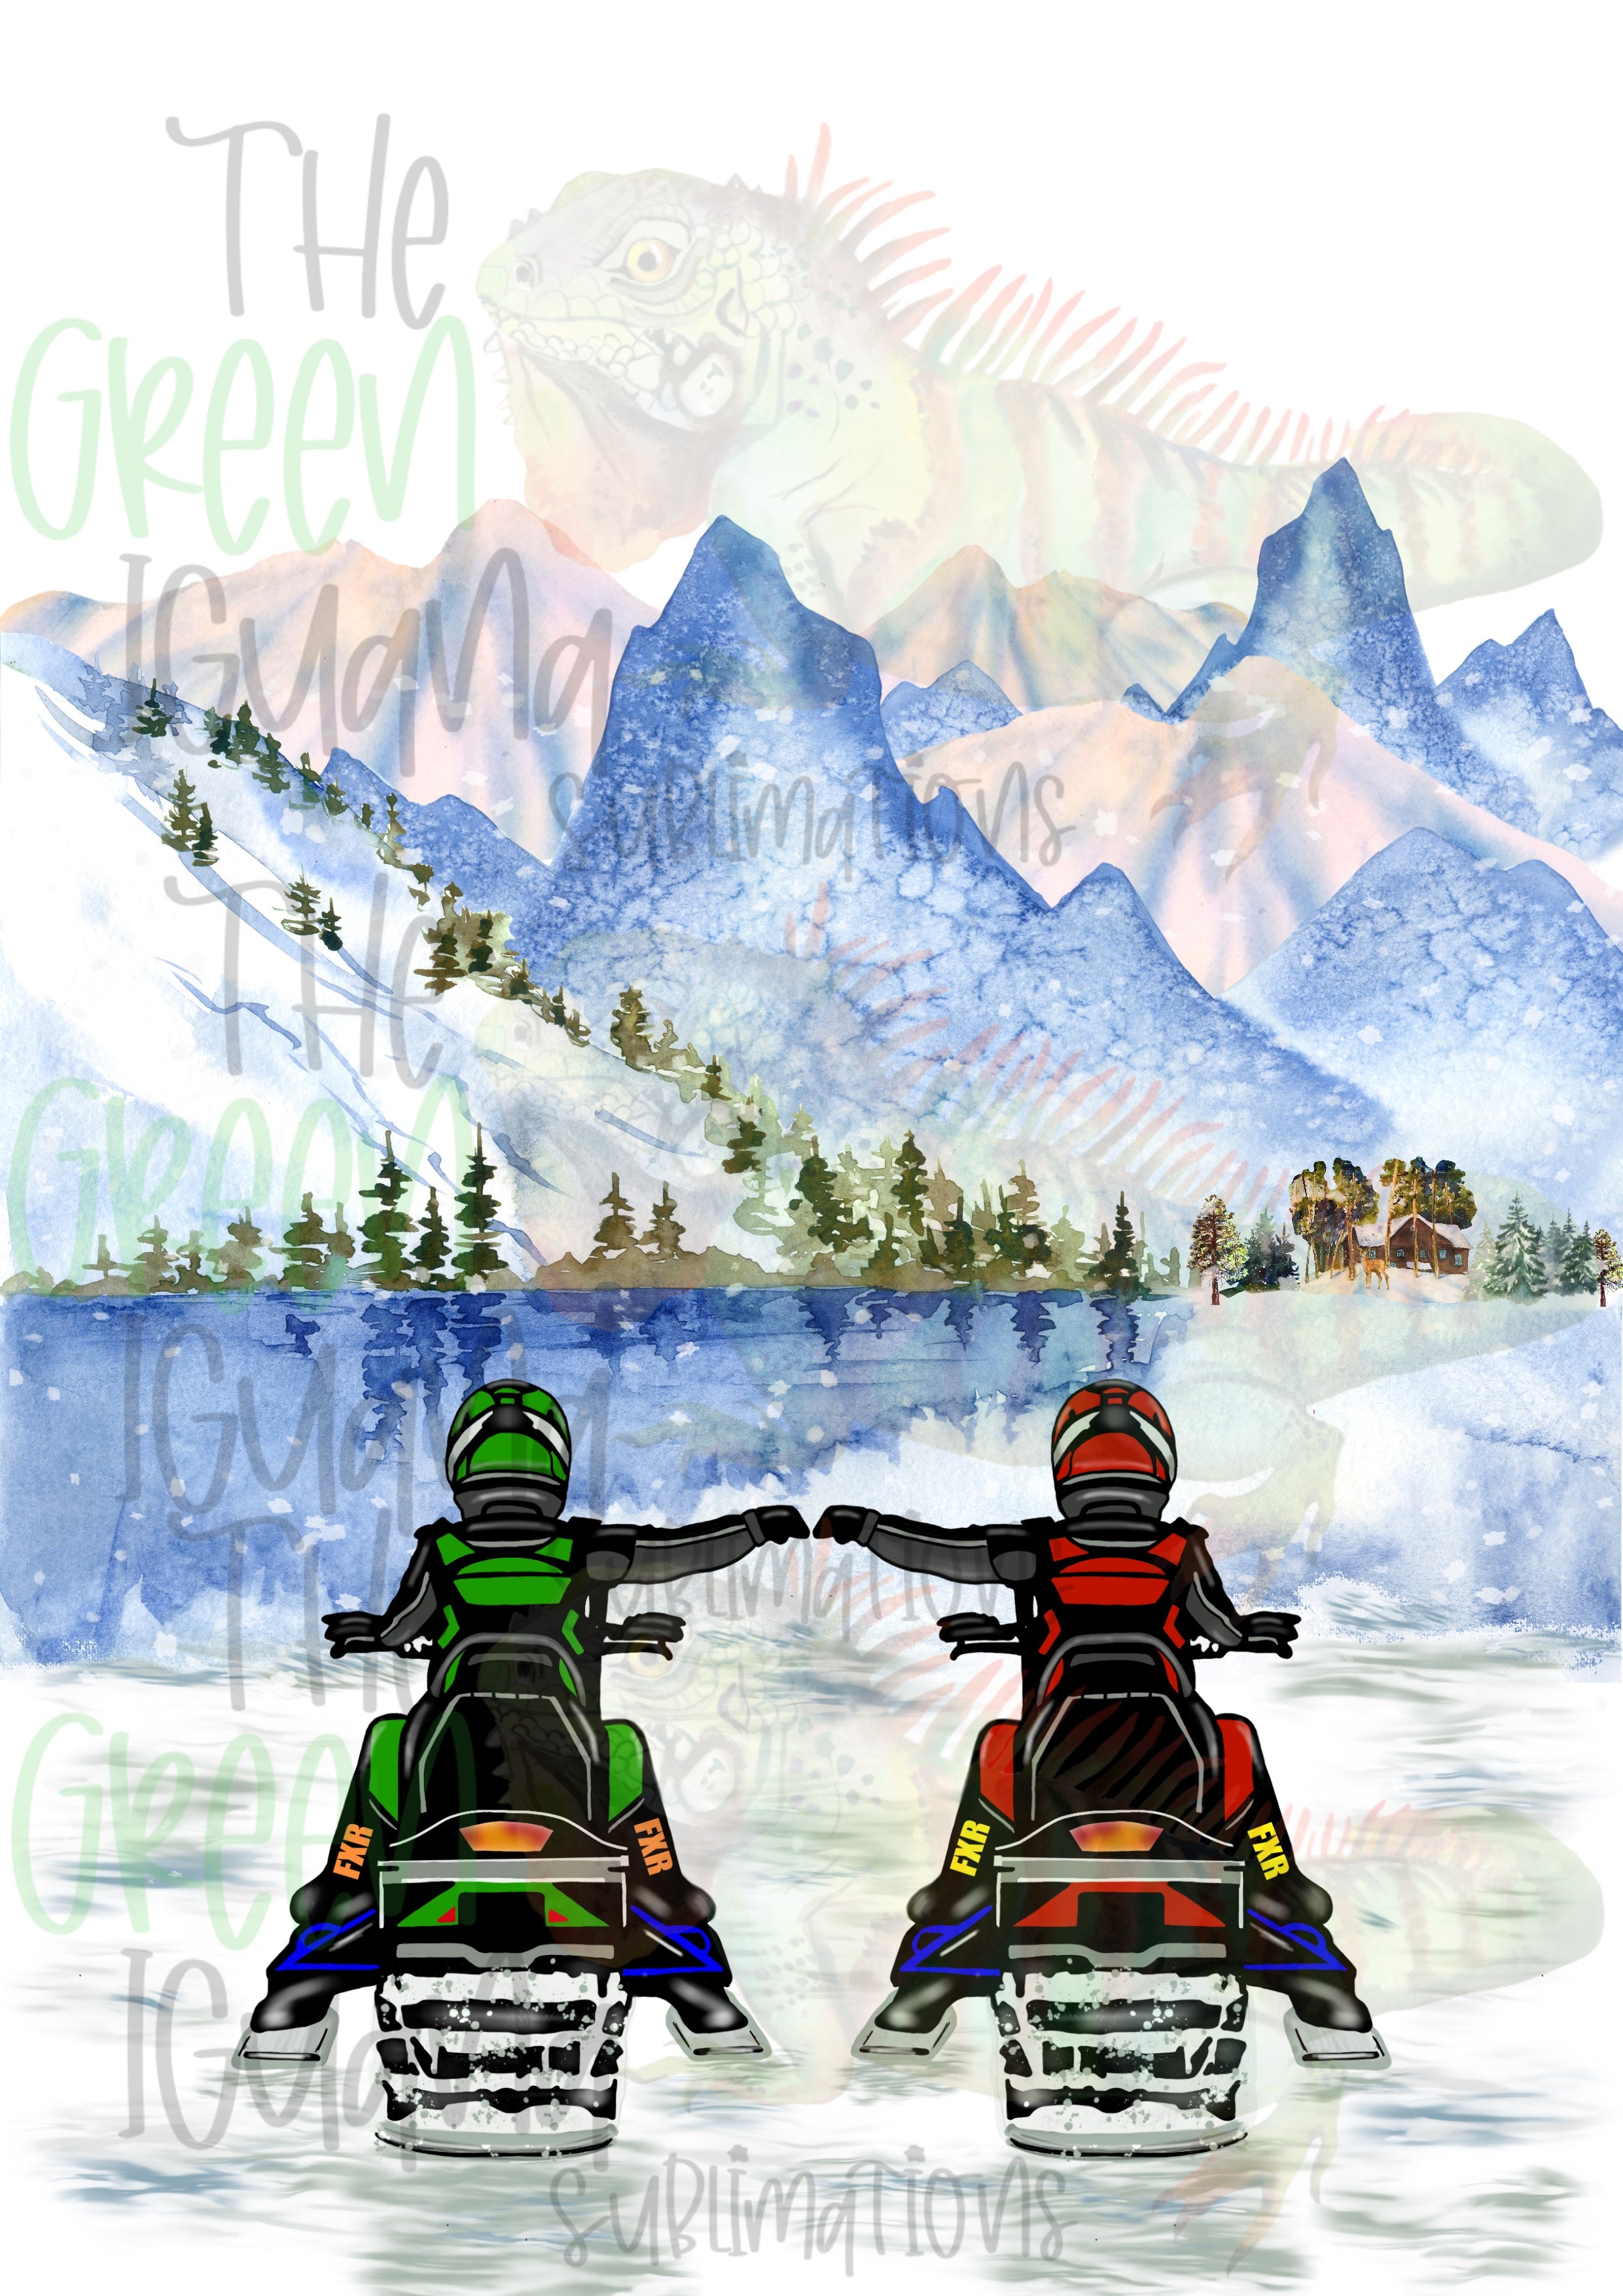 Snowmobile couple/friends - lime green & red (no braaap on license plate) DIGITAL